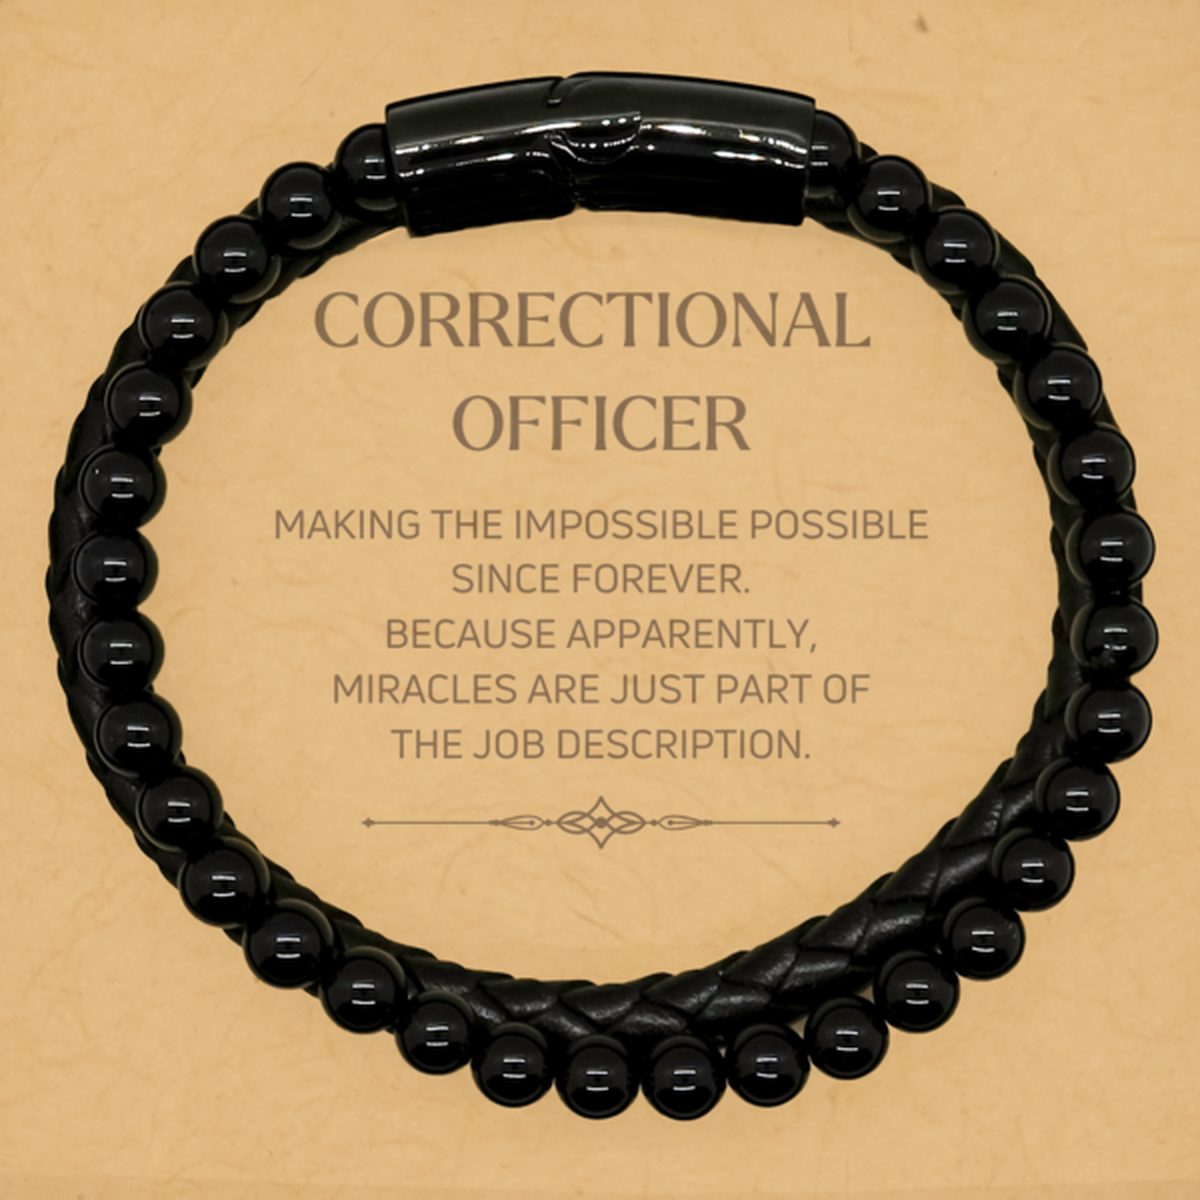 Funny Correctional Officer Gifts, Miracles are just part of the job description, Inspirational Birthday Stone Leather Bracelets For Correctional Officer, Men, Women, Coworkers, Friends, Boss